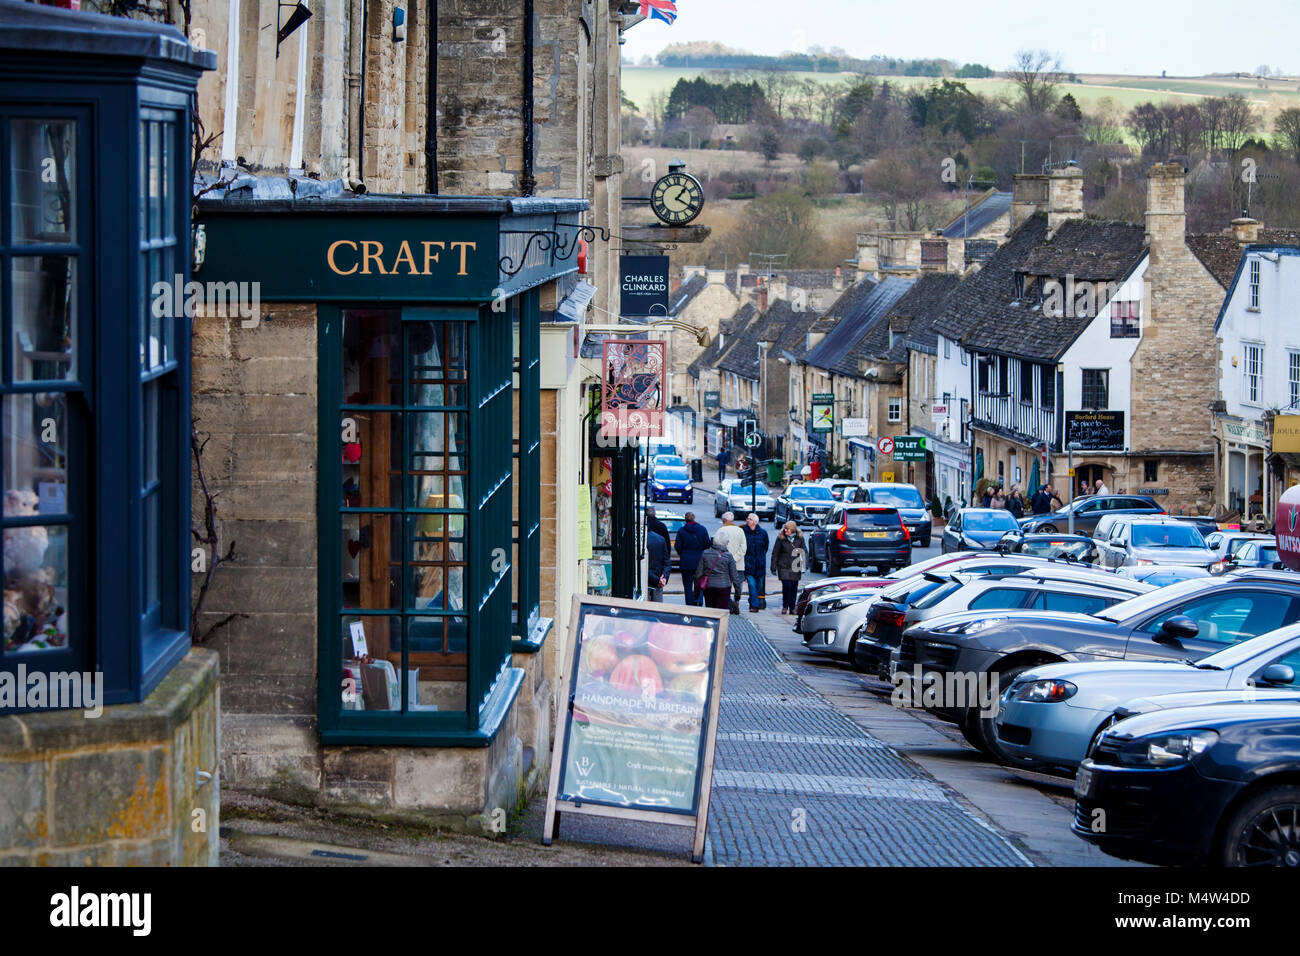 BURFORD, UK - FEBRUARY 15th, 2018: Burford is a medieval town on the River Windrush in the Cotswold hills in West Oxfordshire, England. Stock Photo